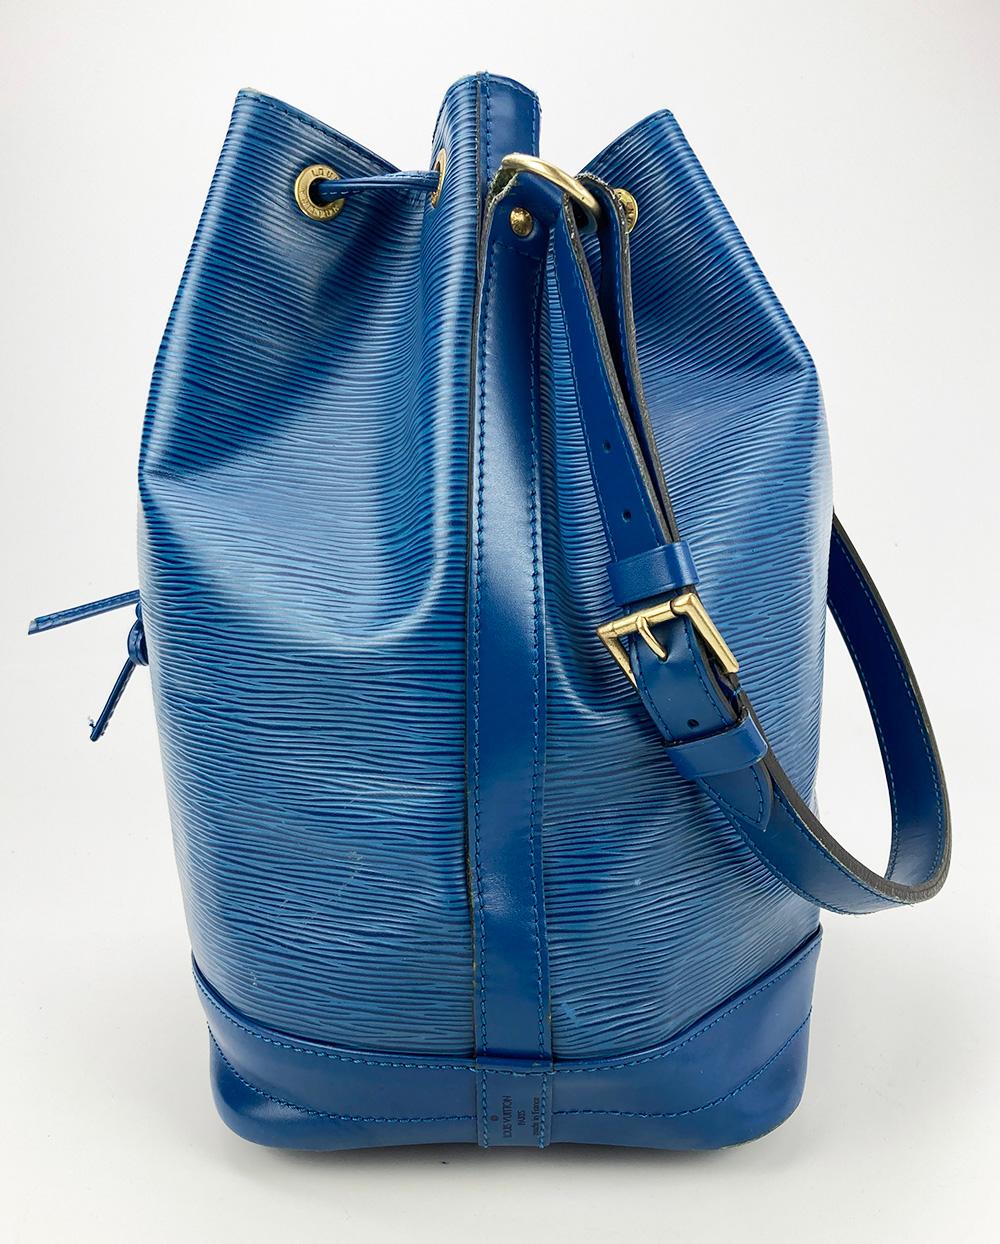 Louis Vuitton Blue Toldeo Epi Noe Drawstring Bucket Bag in good condition. Blue epi leather exterior trimmed with golden brass hardware and smooth leather. Top drawstring closure opens to a blue suede interior. scuffs on bottom exterior corners, one